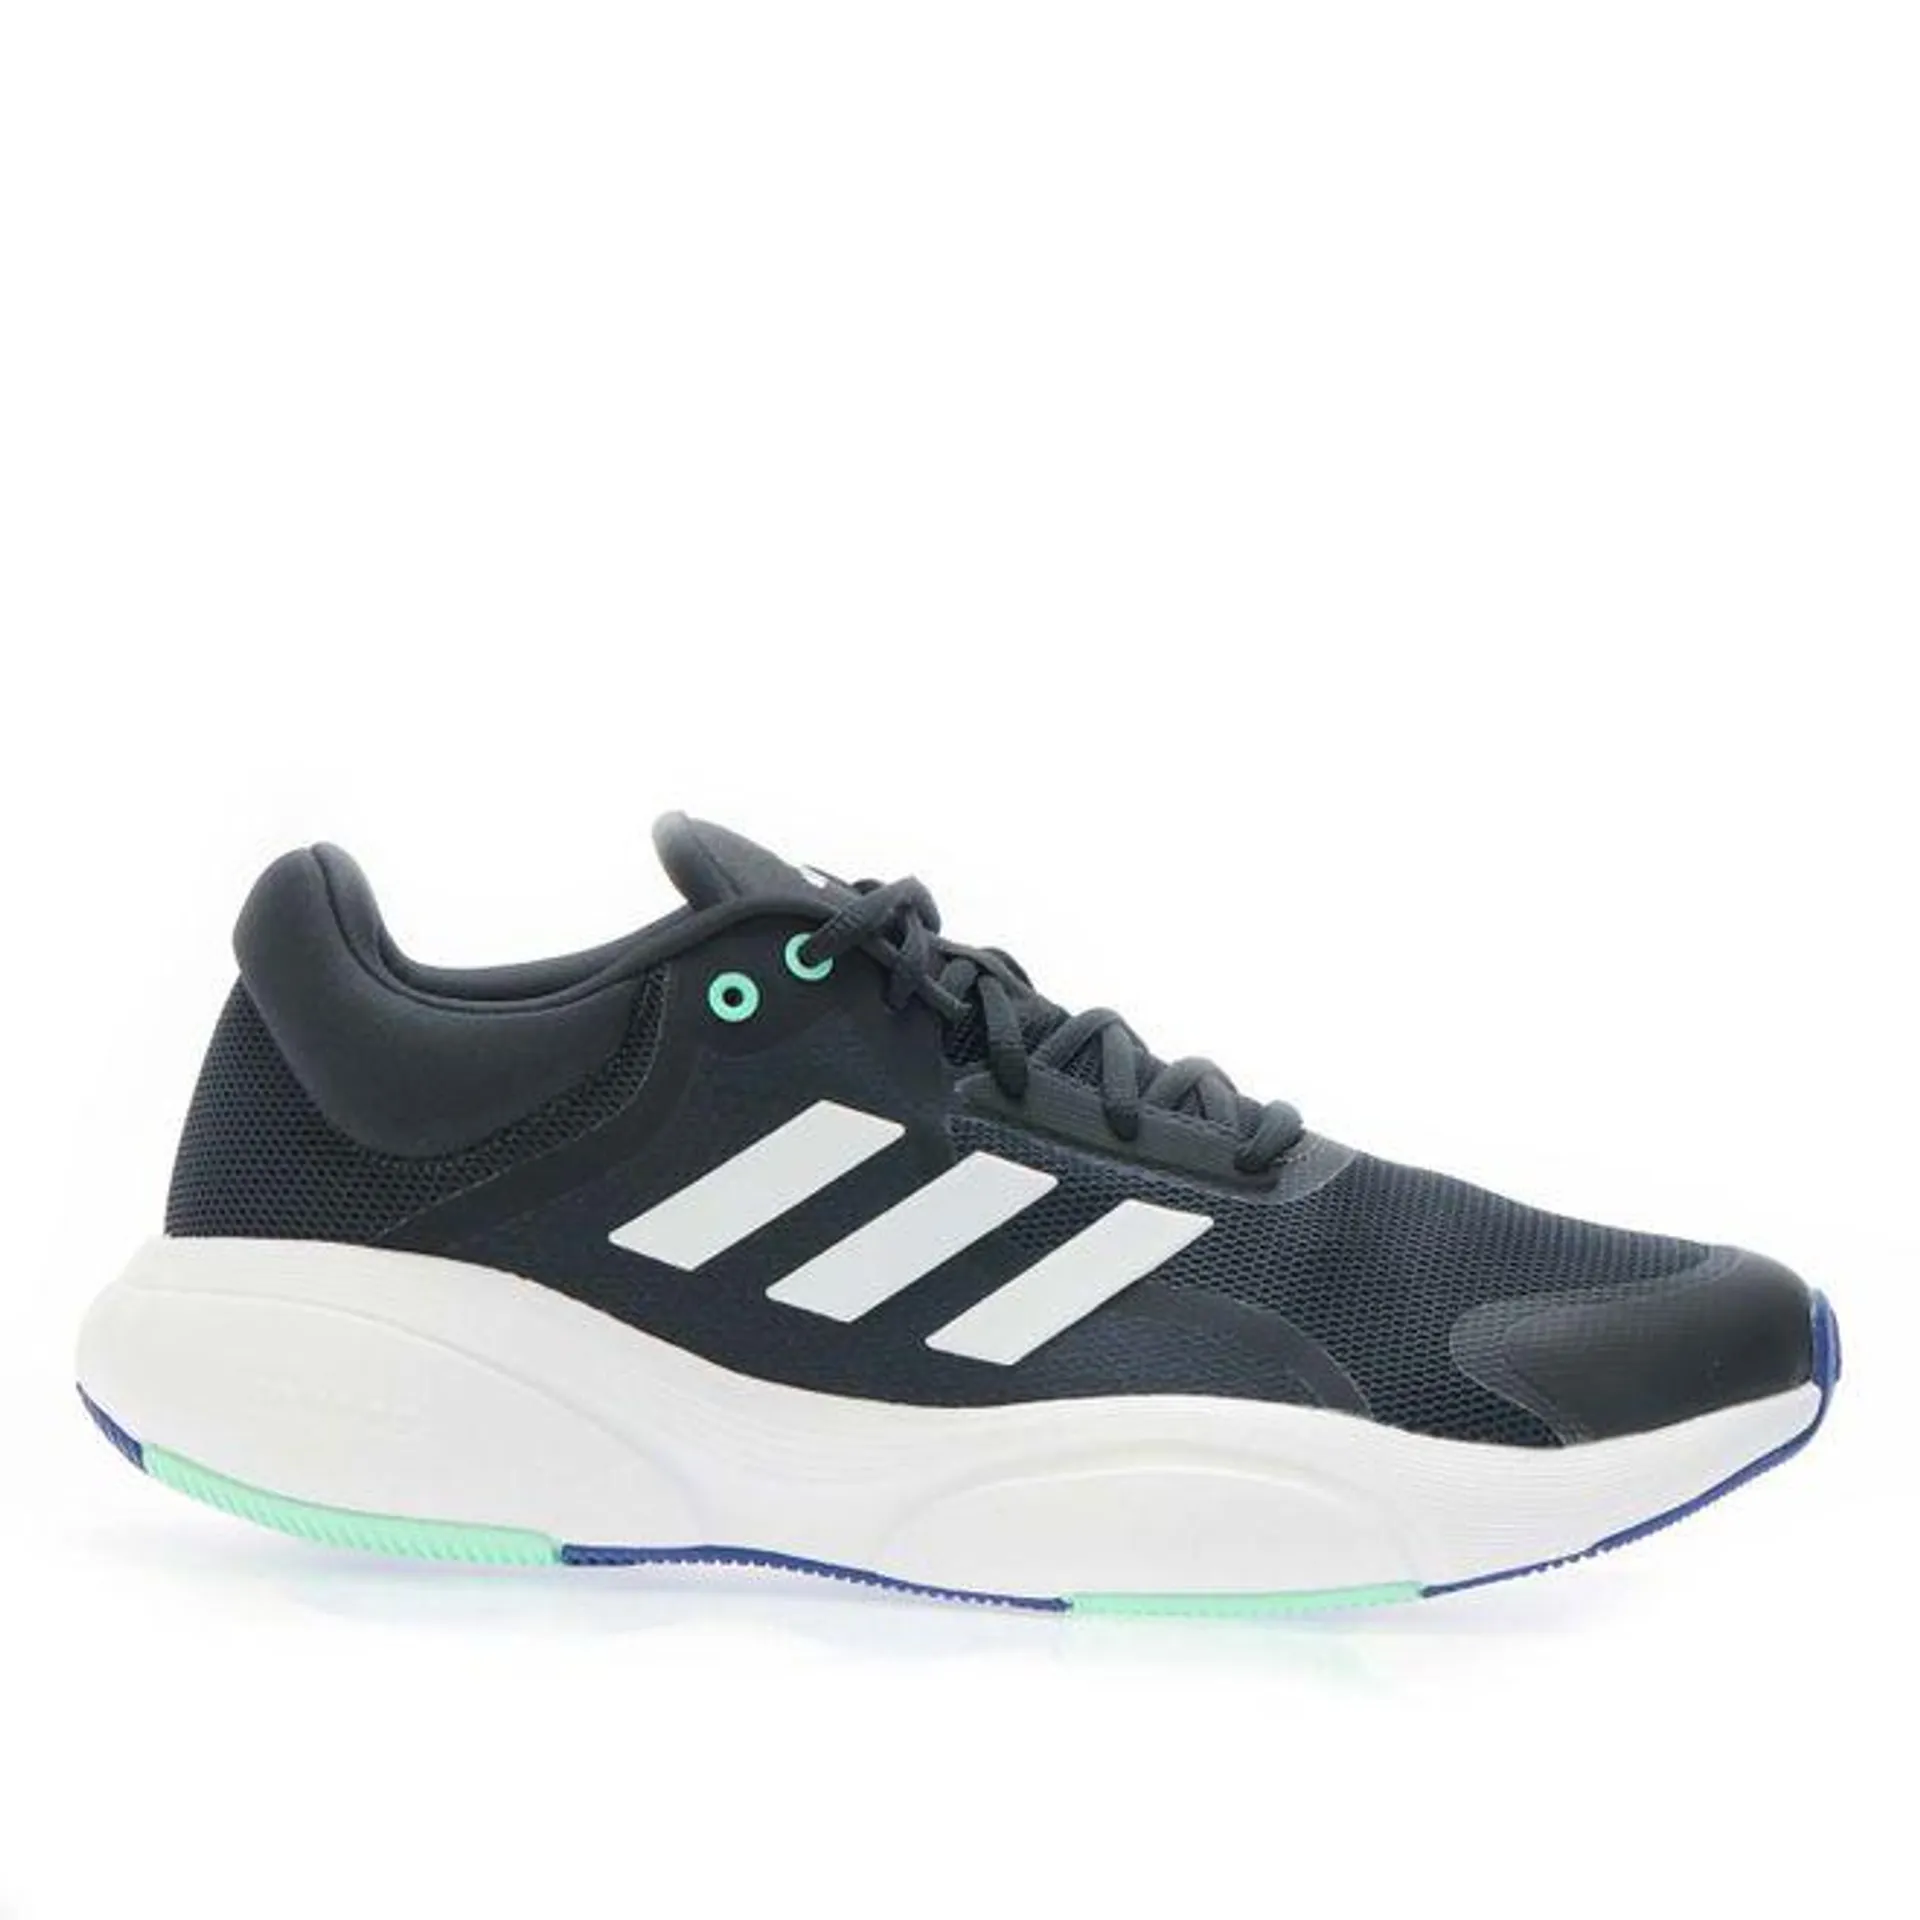 adidas Mens Response Trainers in Black-White